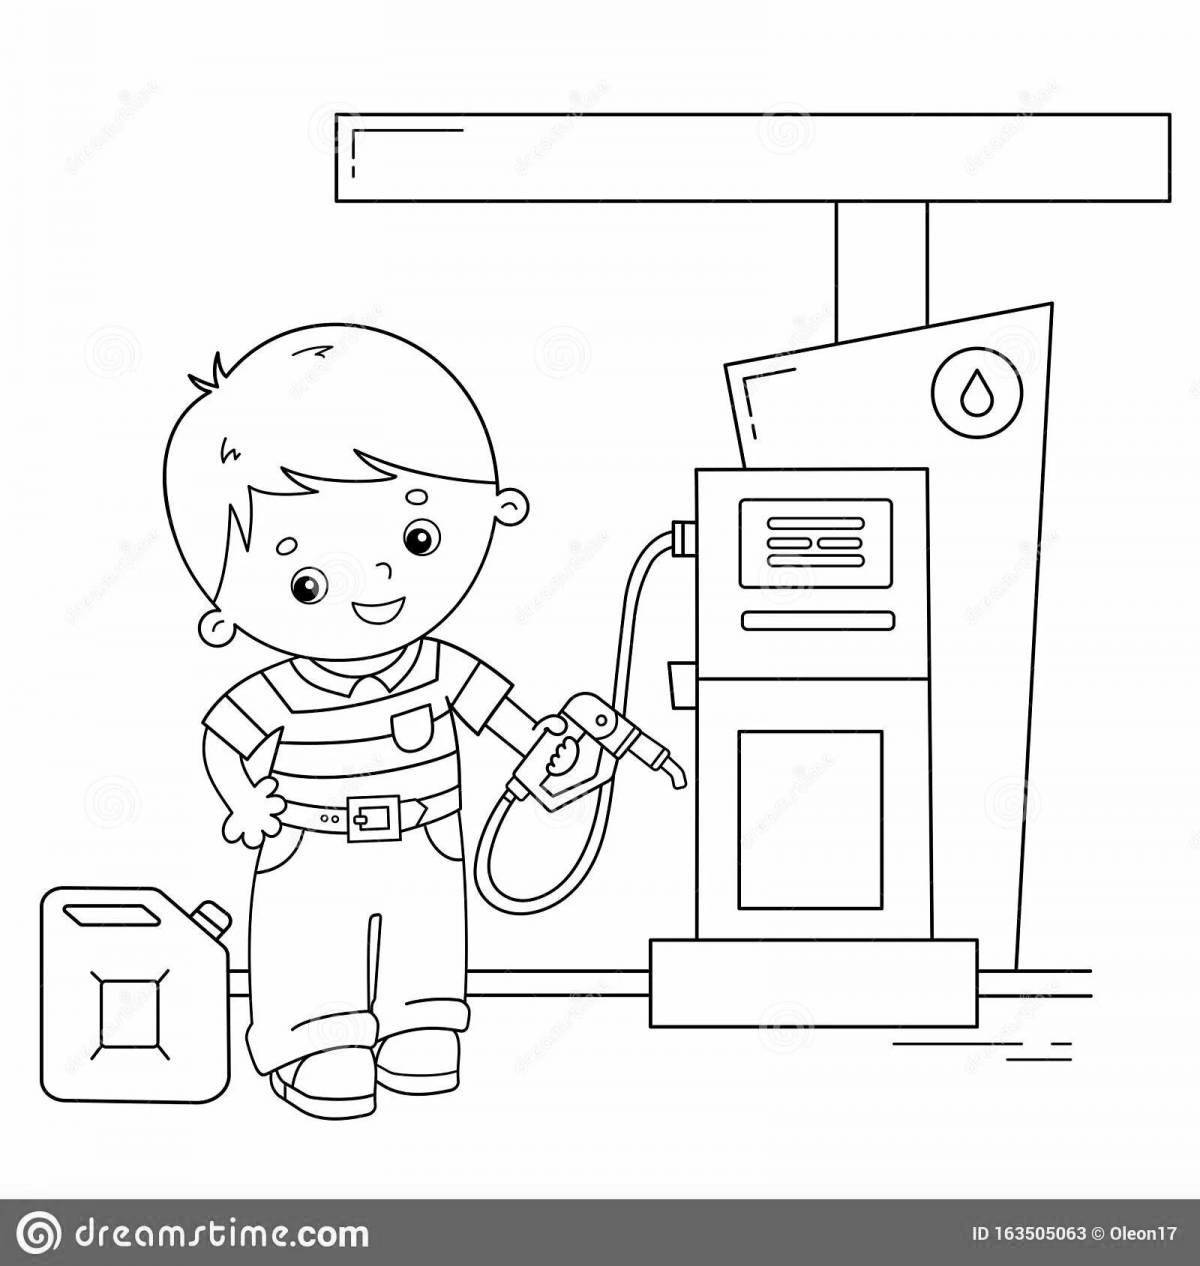 Calming dressing coloring page